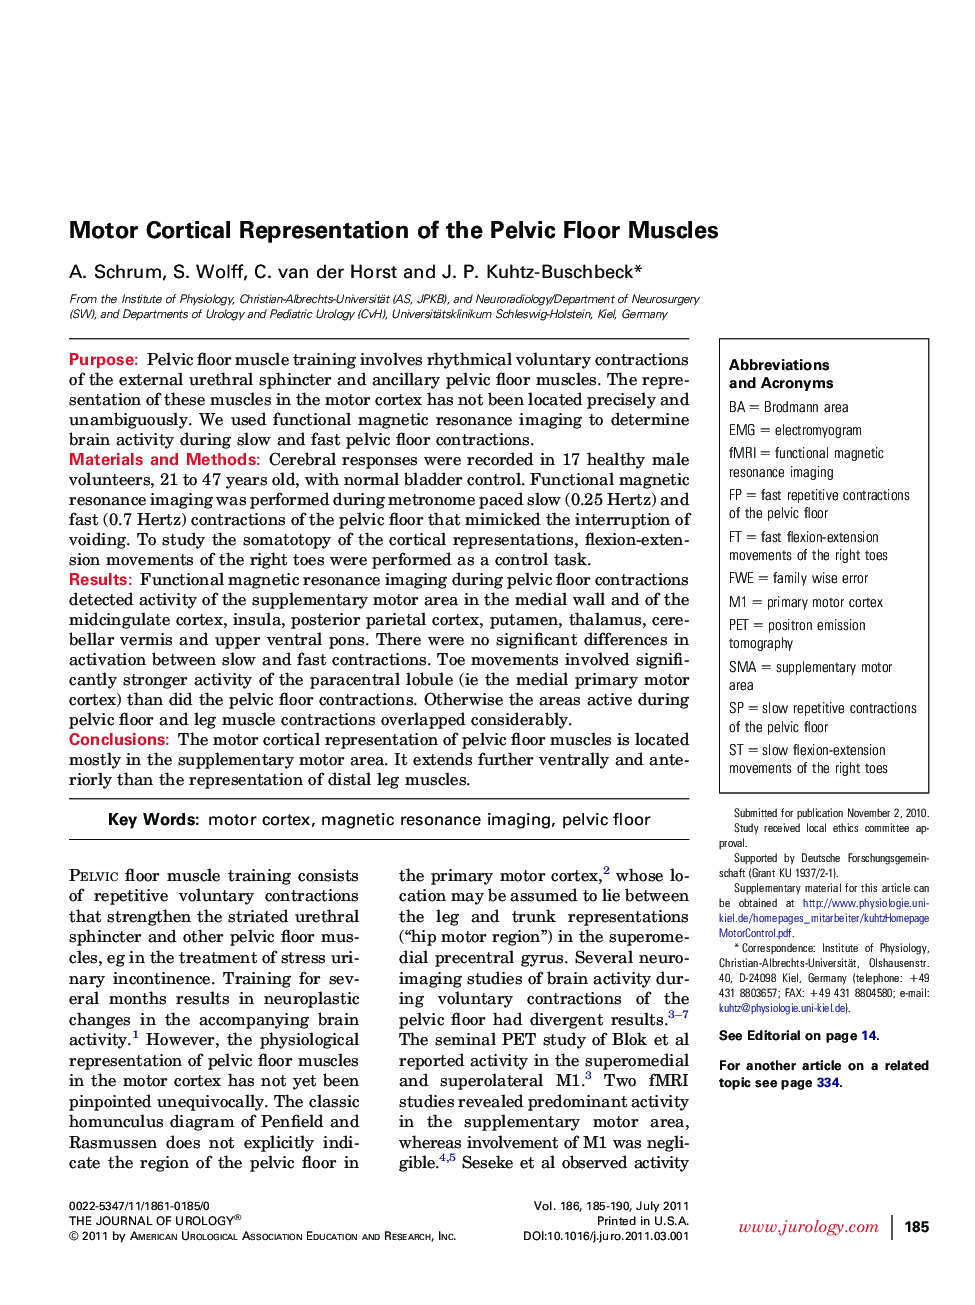 Motor Cortical Representation of the Pelvic Floor Muscles 